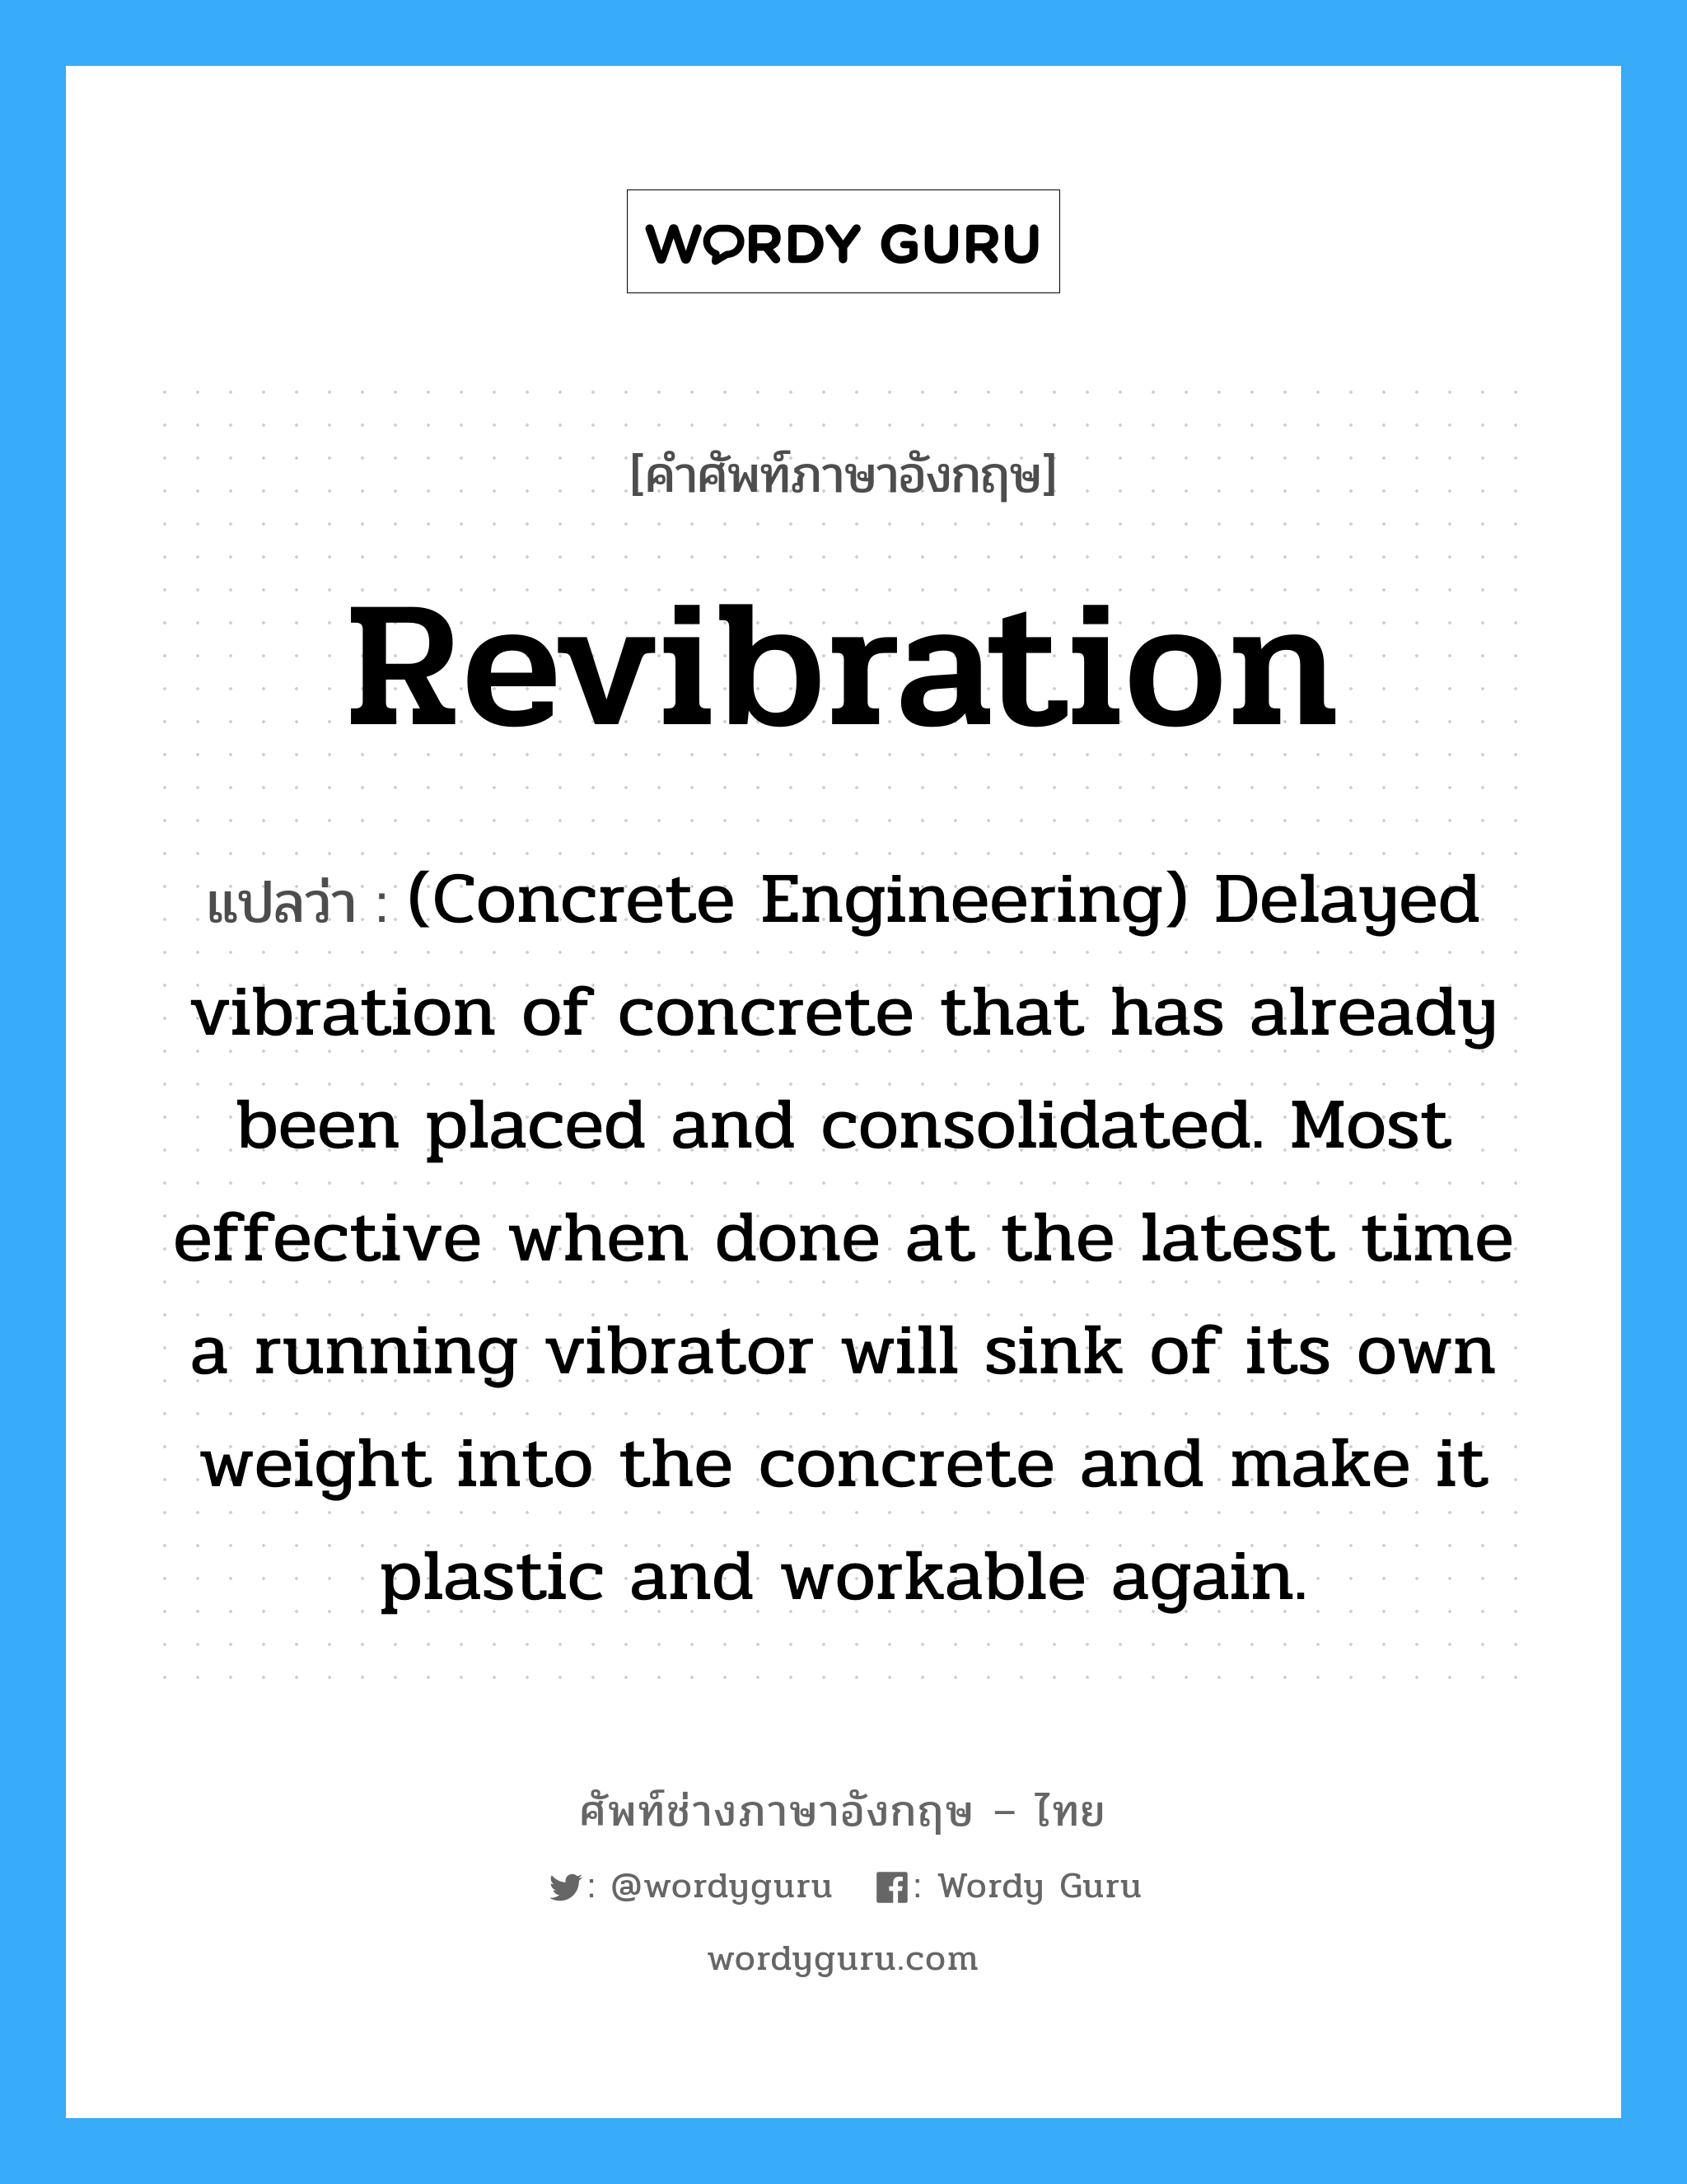 (Concrete Engineering) Delayed vibration of concrete that has already been placed and consolidated. Most effective when done at the latest time a running vibrator will sink of its own weight into the concrete and make it plastic and workable again. ภาษาอังกฤษ?, คำศัพท์ช่างภาษาอังกฤษ - ไทย (Concrete Engineering) Delayed vibration of concrete that has already been placed and consolidated. Most effective when done at the latest time a running vibrator will sink of its own weight into the concrete and make it plastic and workable again. คำศัพท์ภาษาอังกฤษ (Concrete Engineering) Delayed vibration of concrete that has already been placed and consolidated. Most effective when done at the latest time a running vibrator will sink of its own weight into the concrete and make it plastic and workable again. แปลว่า Revibration